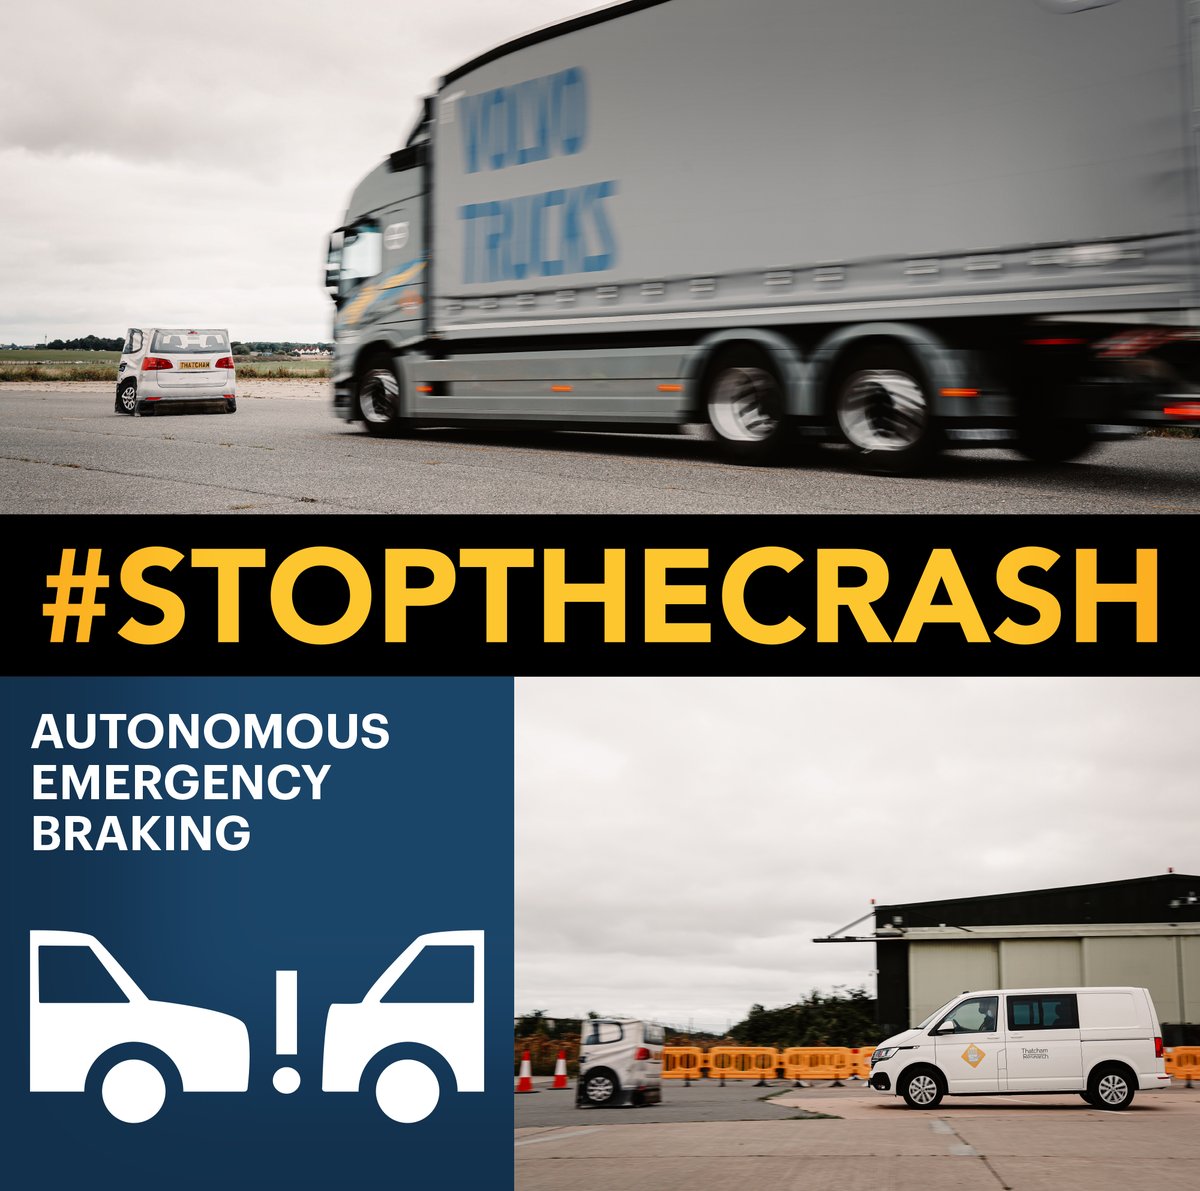 Today's demos at the @Kent_cc launch of new Vision Zero Road Safety Strategy in partnership with @ThatchamRsrch, showcases the life saving benefits of #StopTheCrash technologies  for commercial vehicles. #MissionZero2050